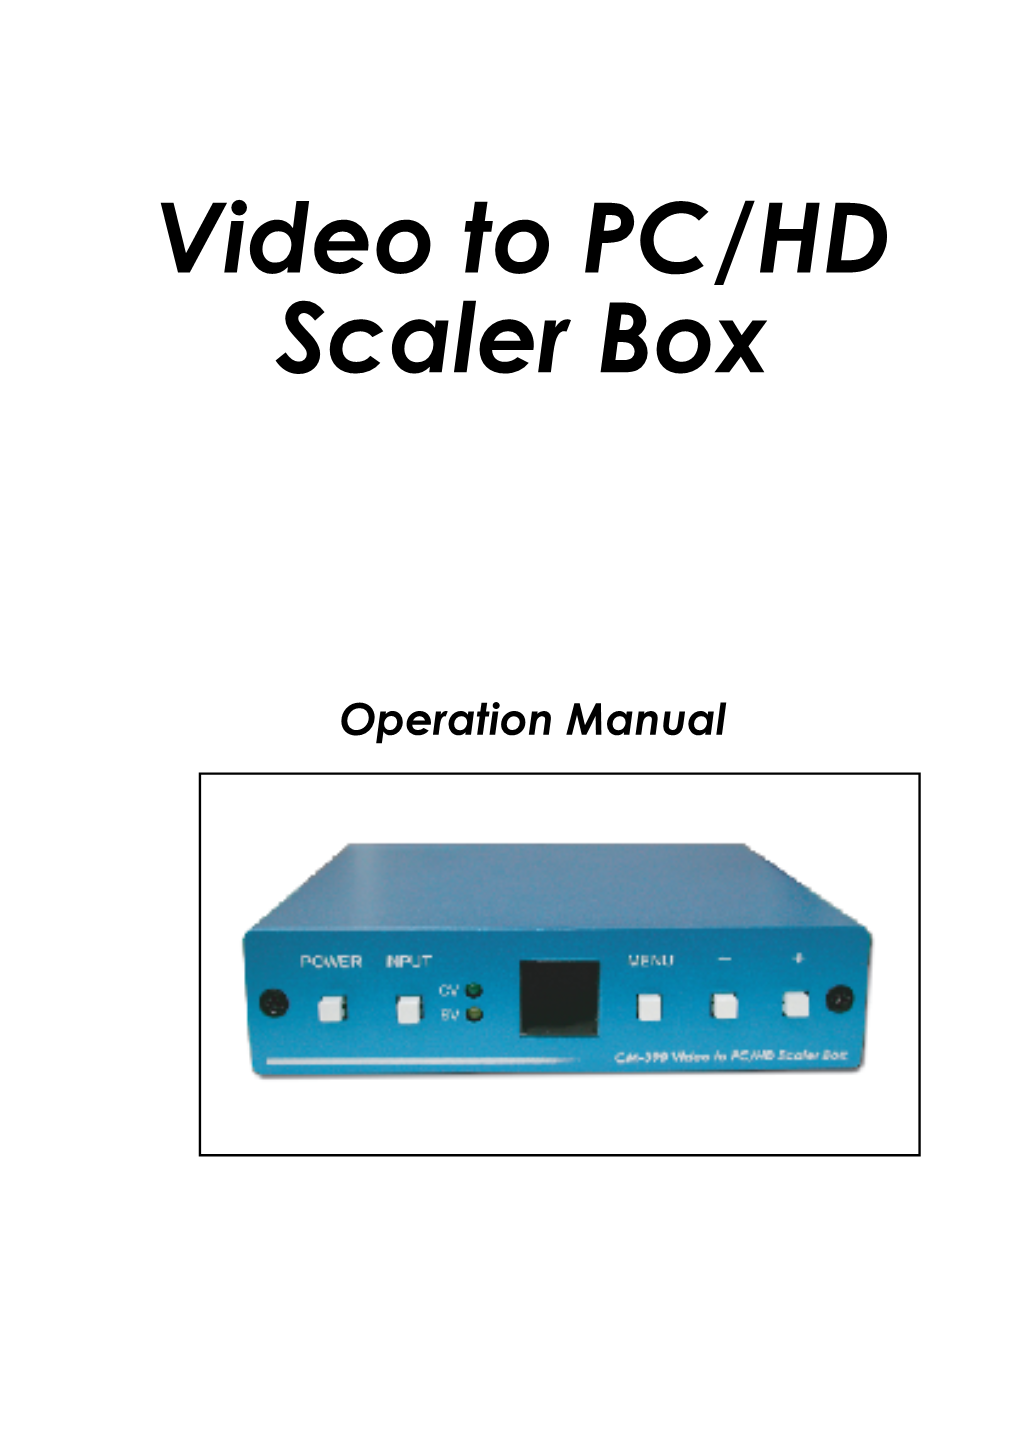 Video to PC/HD Scaler Box